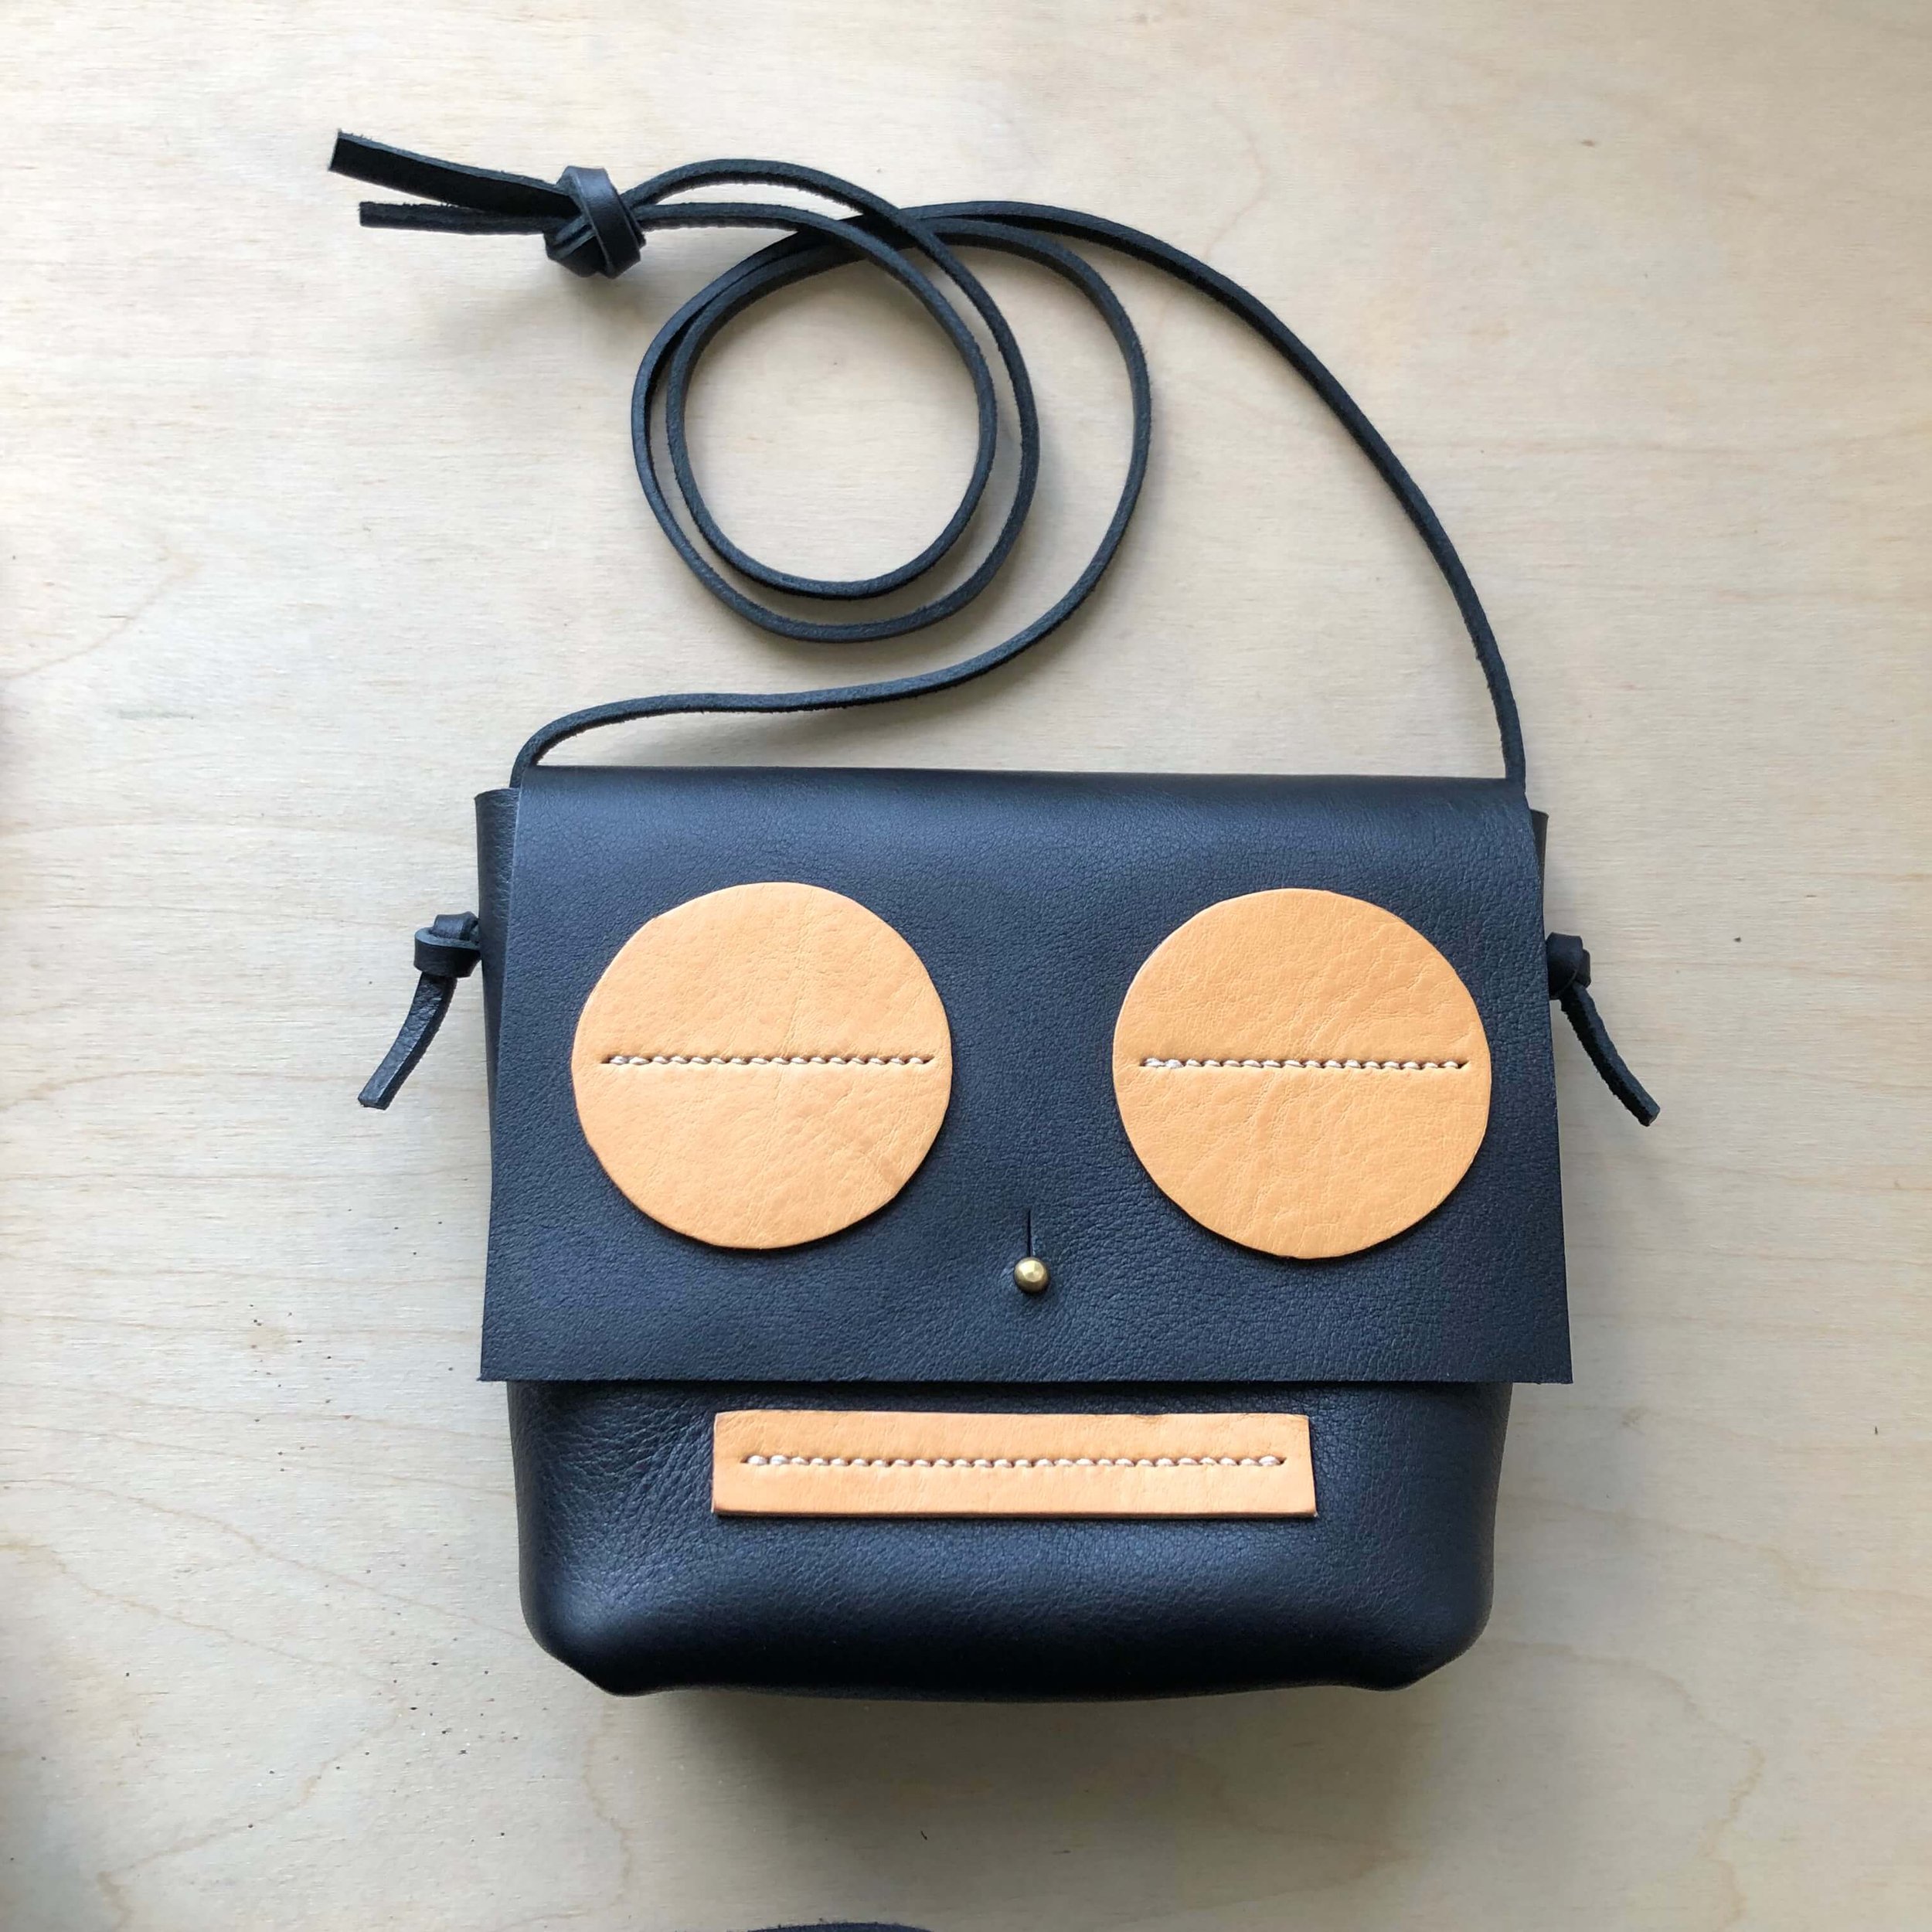 CARV sustainable leather kids robot bag handmade in the UK.